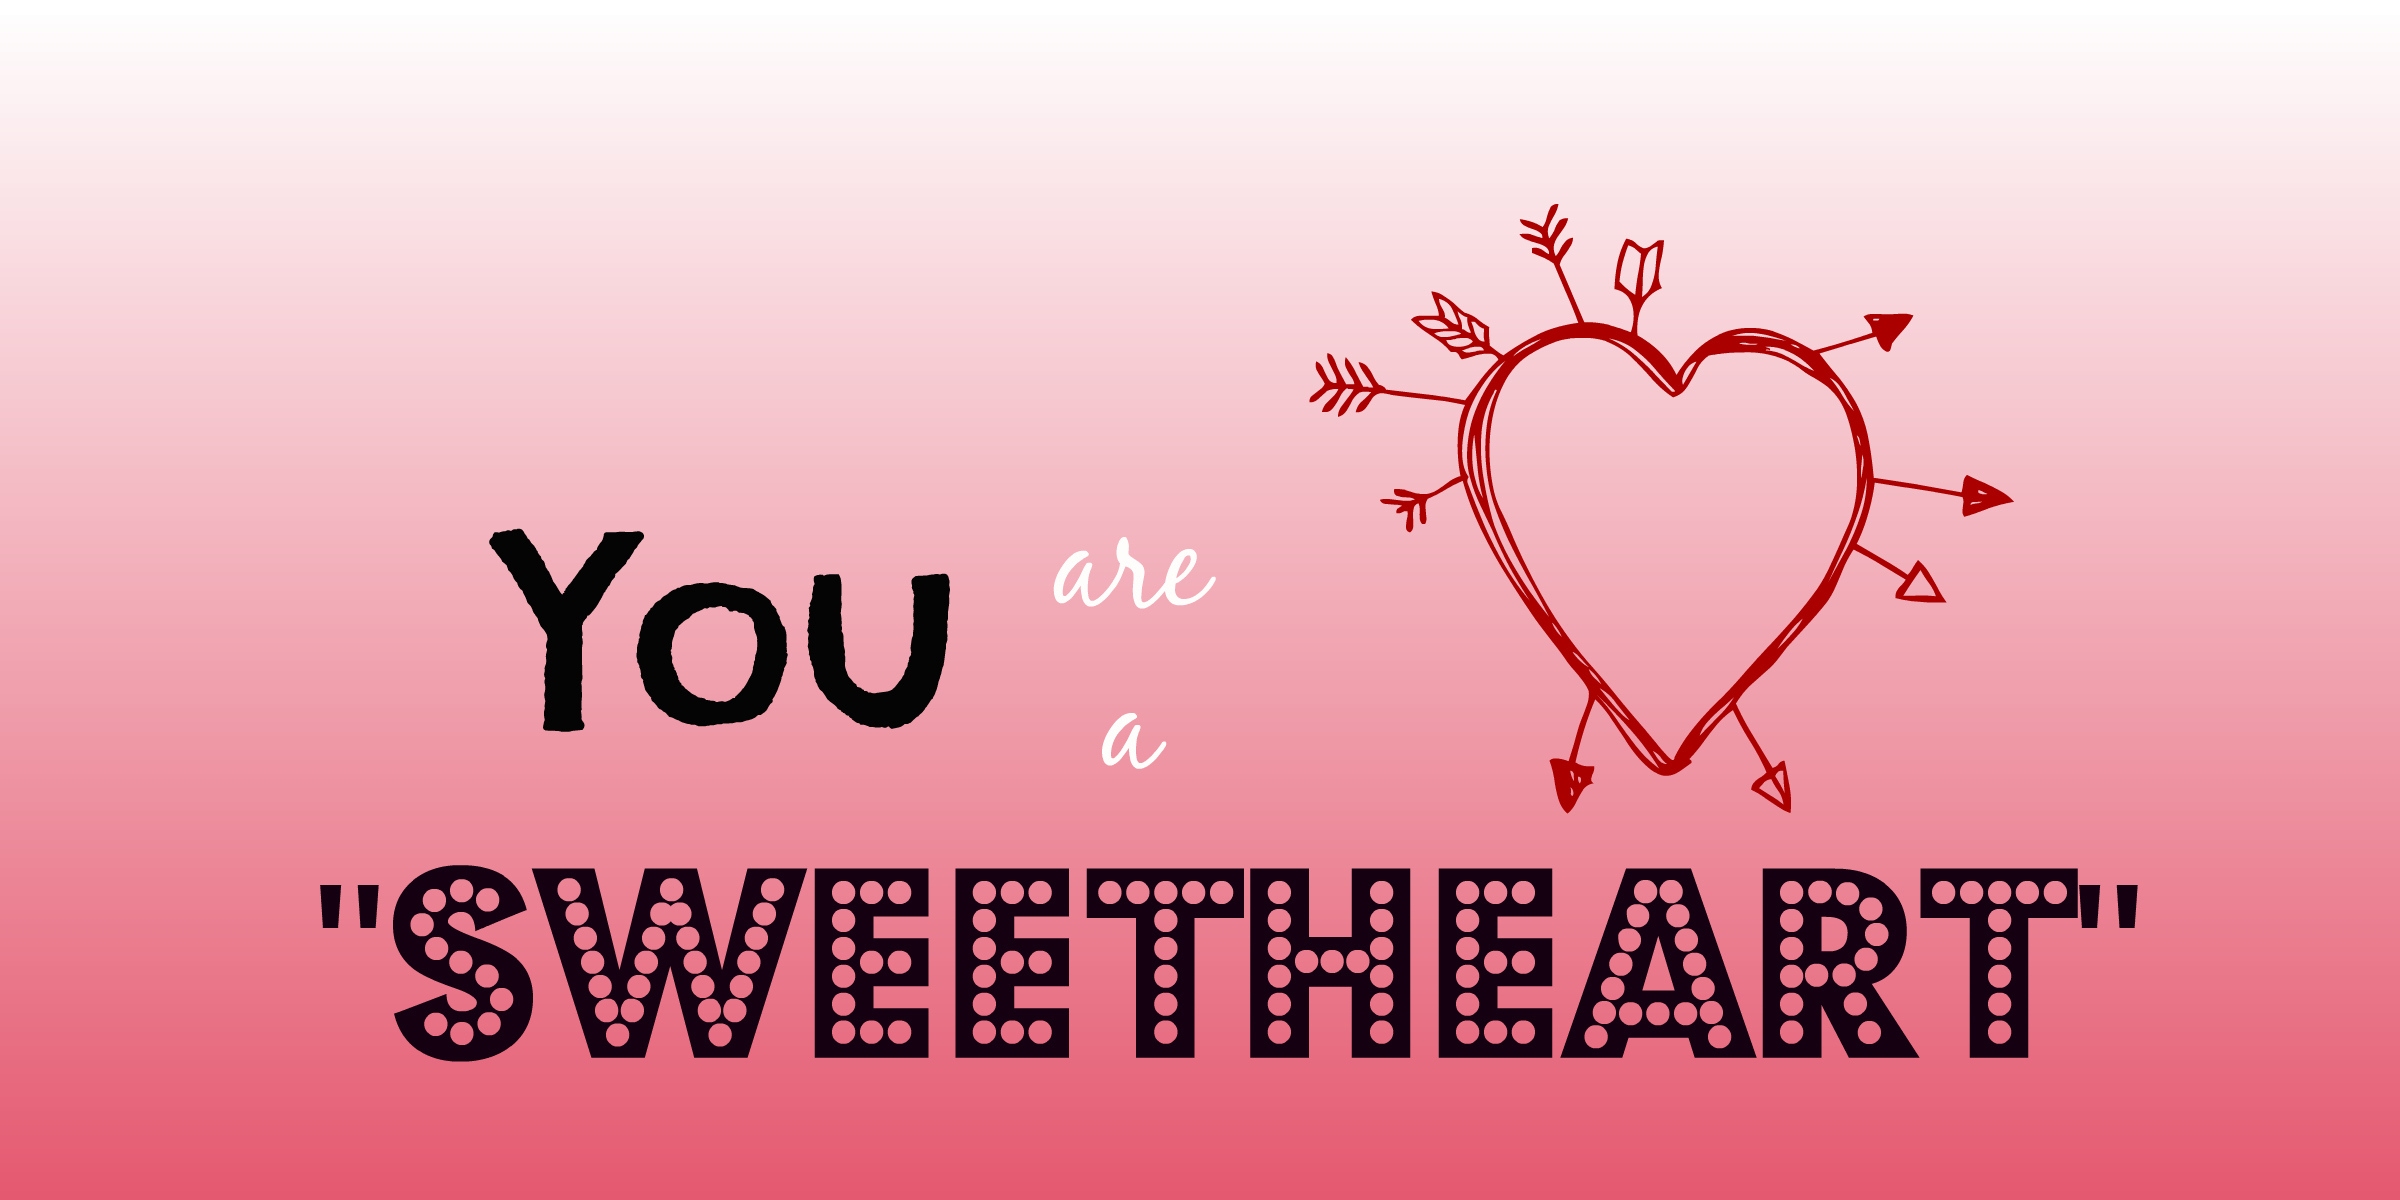 you-are-a-sweetheart-valentine-s-day-card-idea